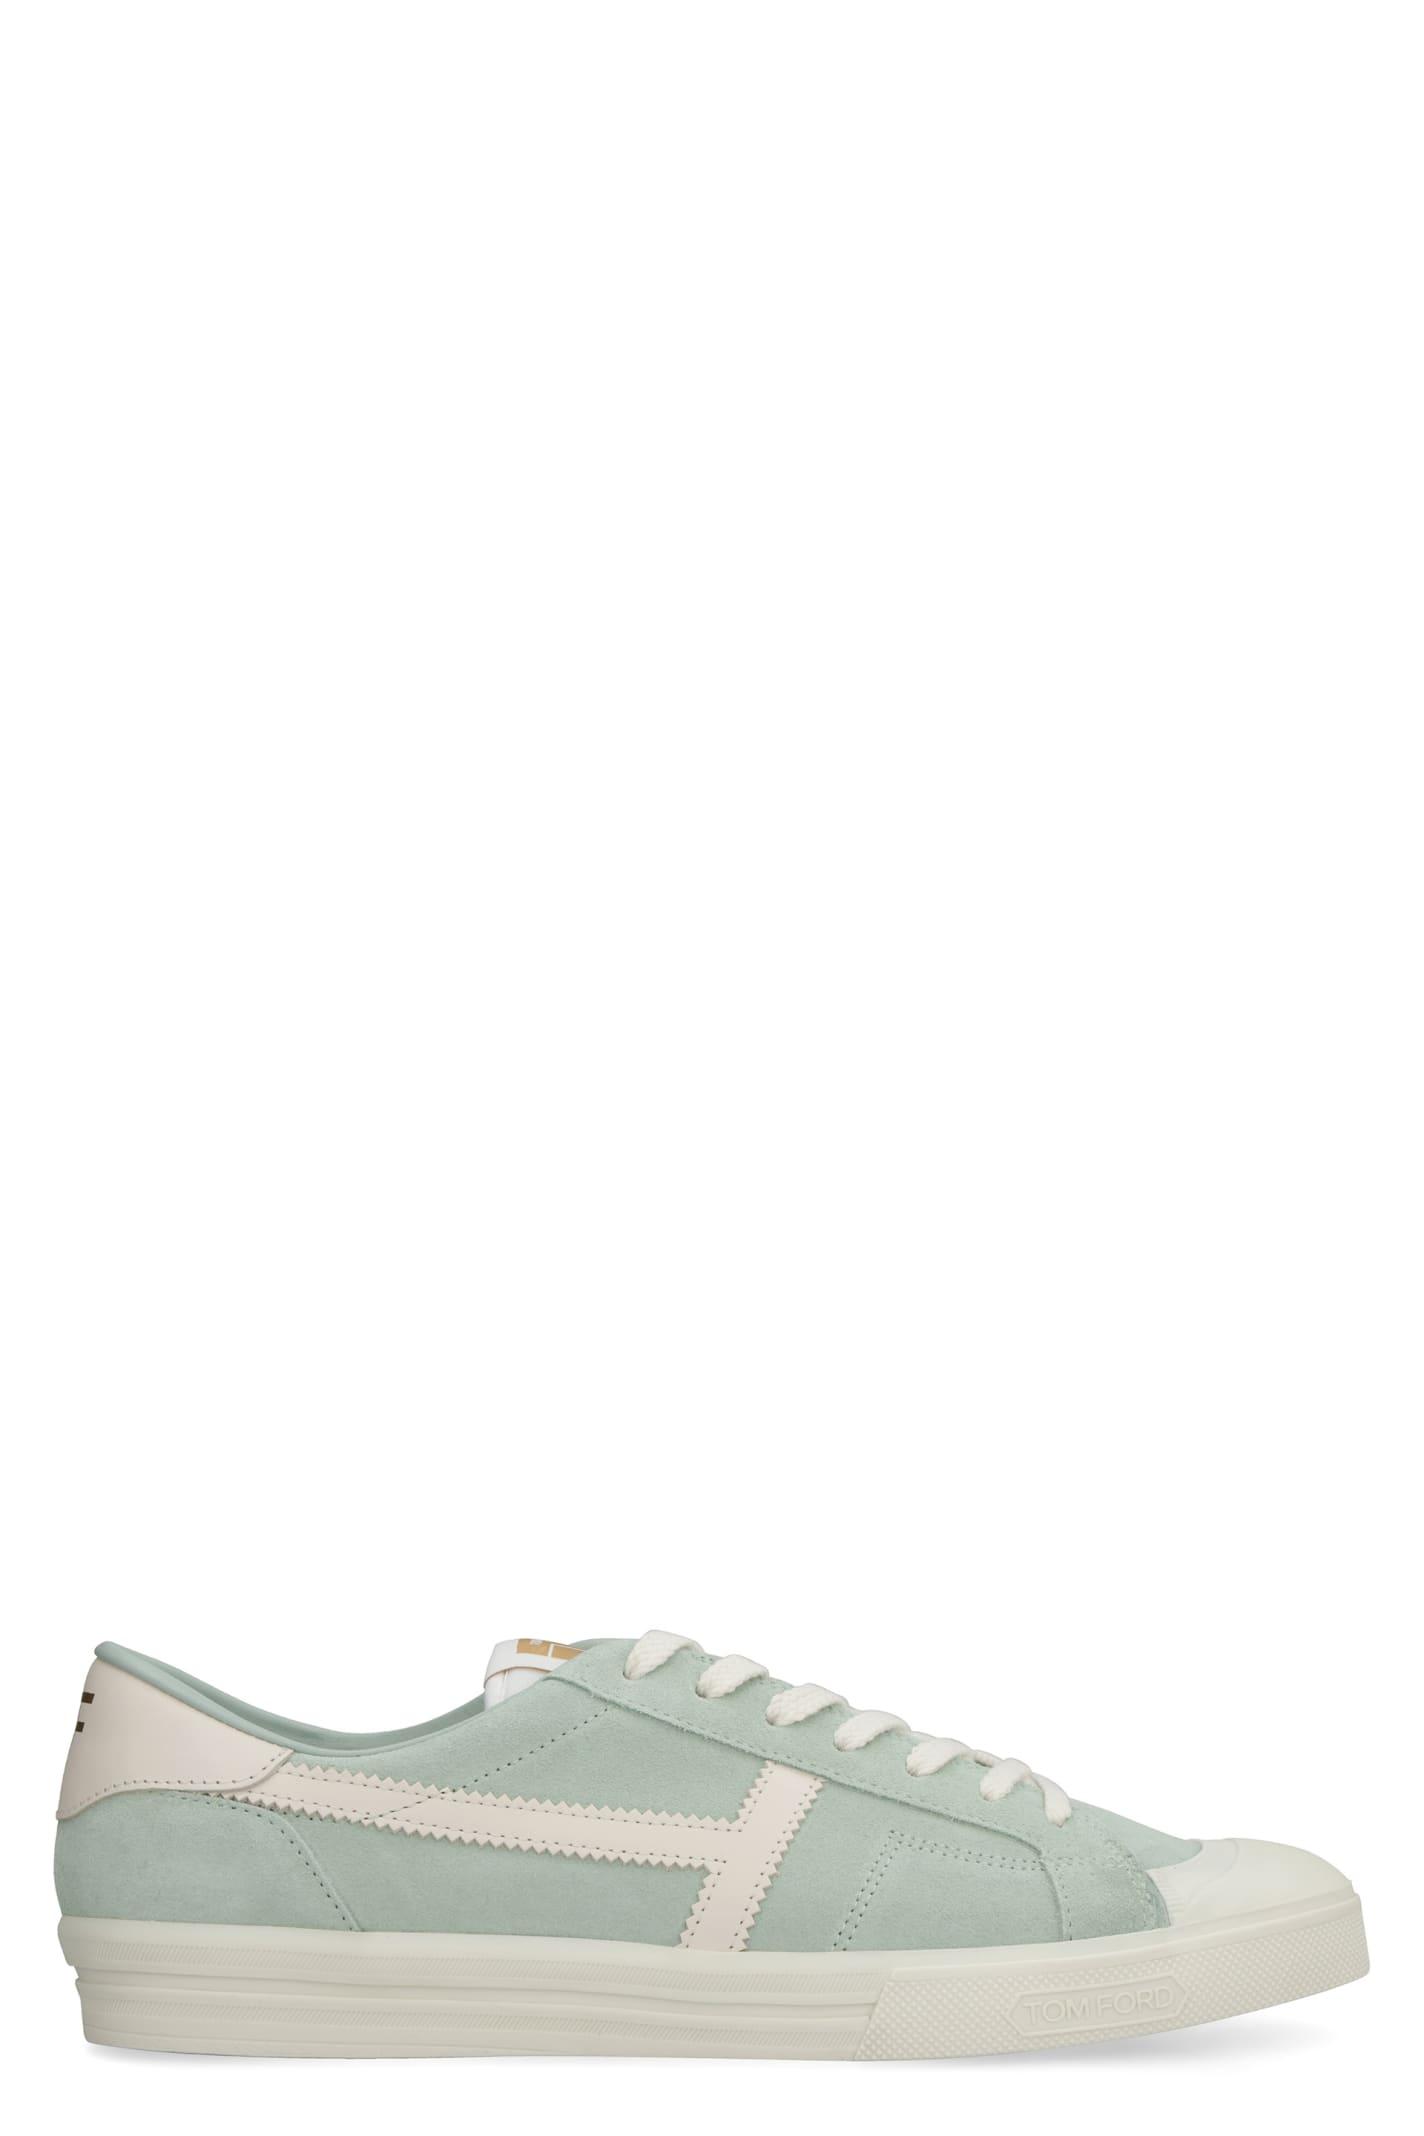 Tom Ford Jarvis Suede Sneakers in Green for Men | Lyst